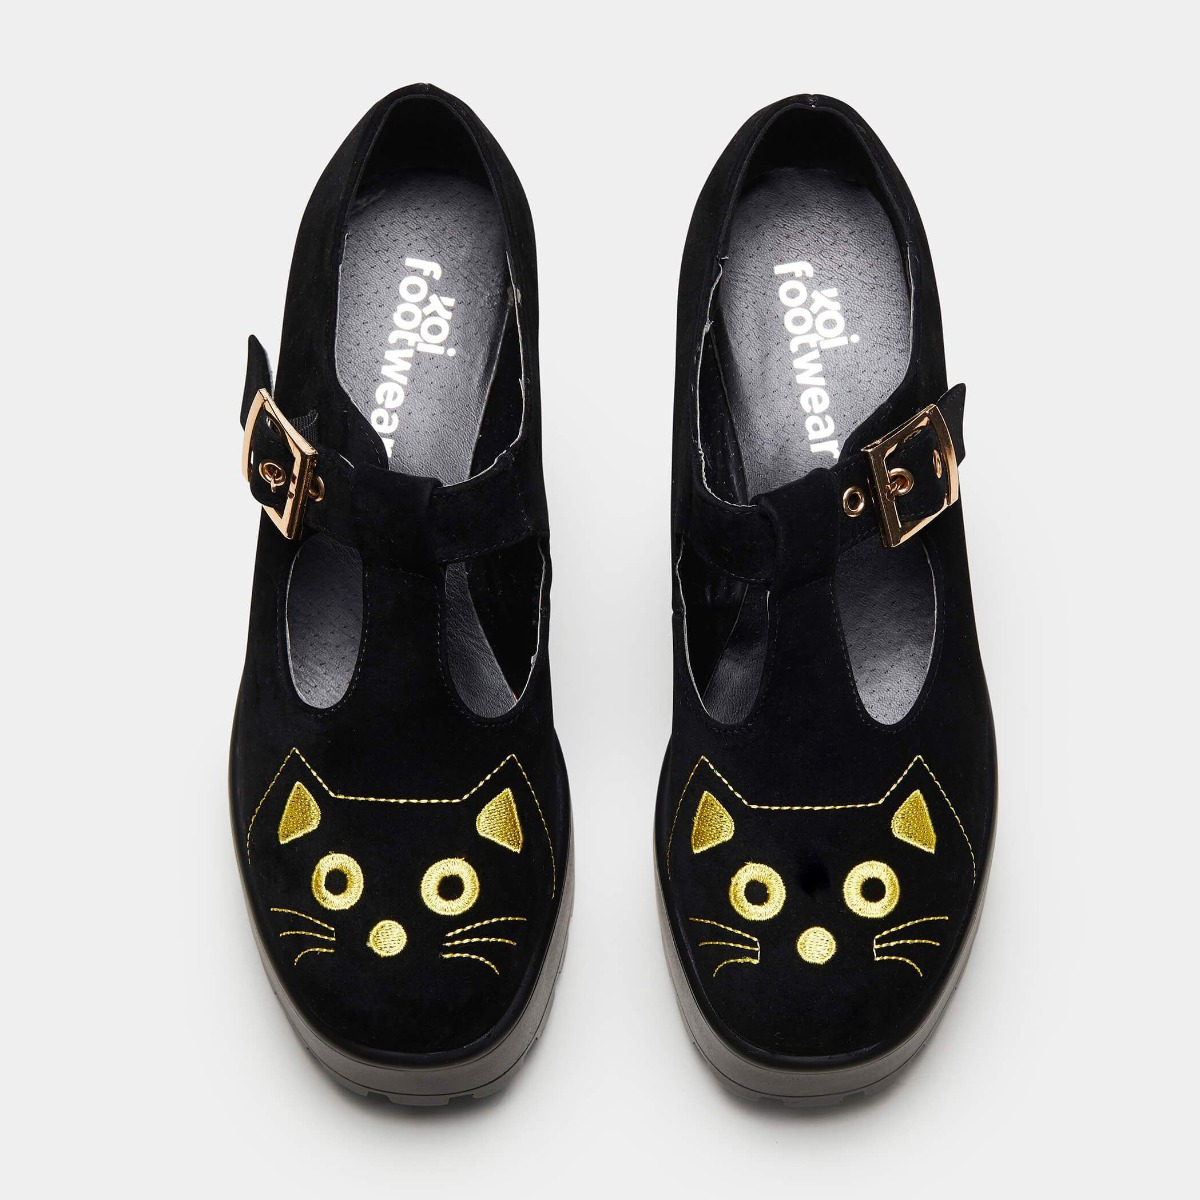 kfnd65bb_chaussures-mary-jane-plateforme-gothique-glam-rock-fuji-cat